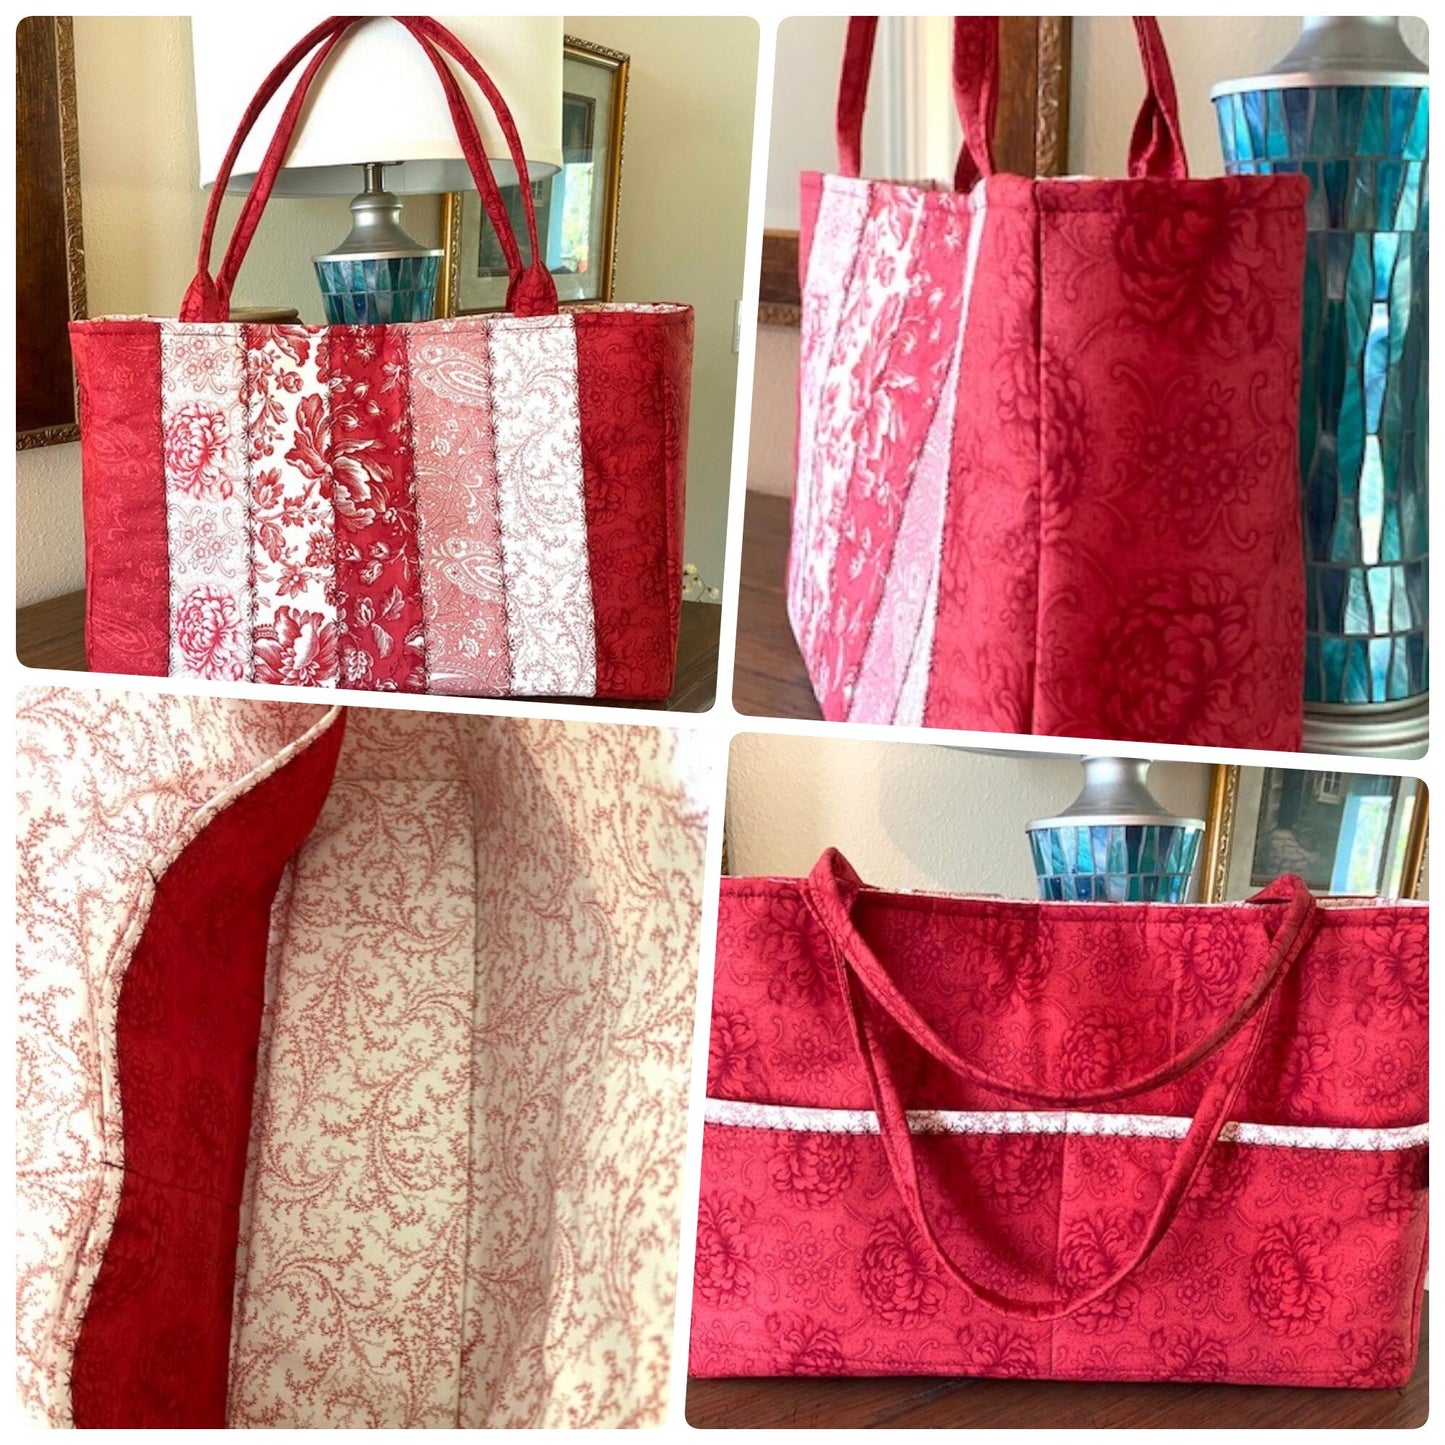 Tote Purse Handbag Patchwork Cranberries fabric 3 Sisters Matching Wallet too